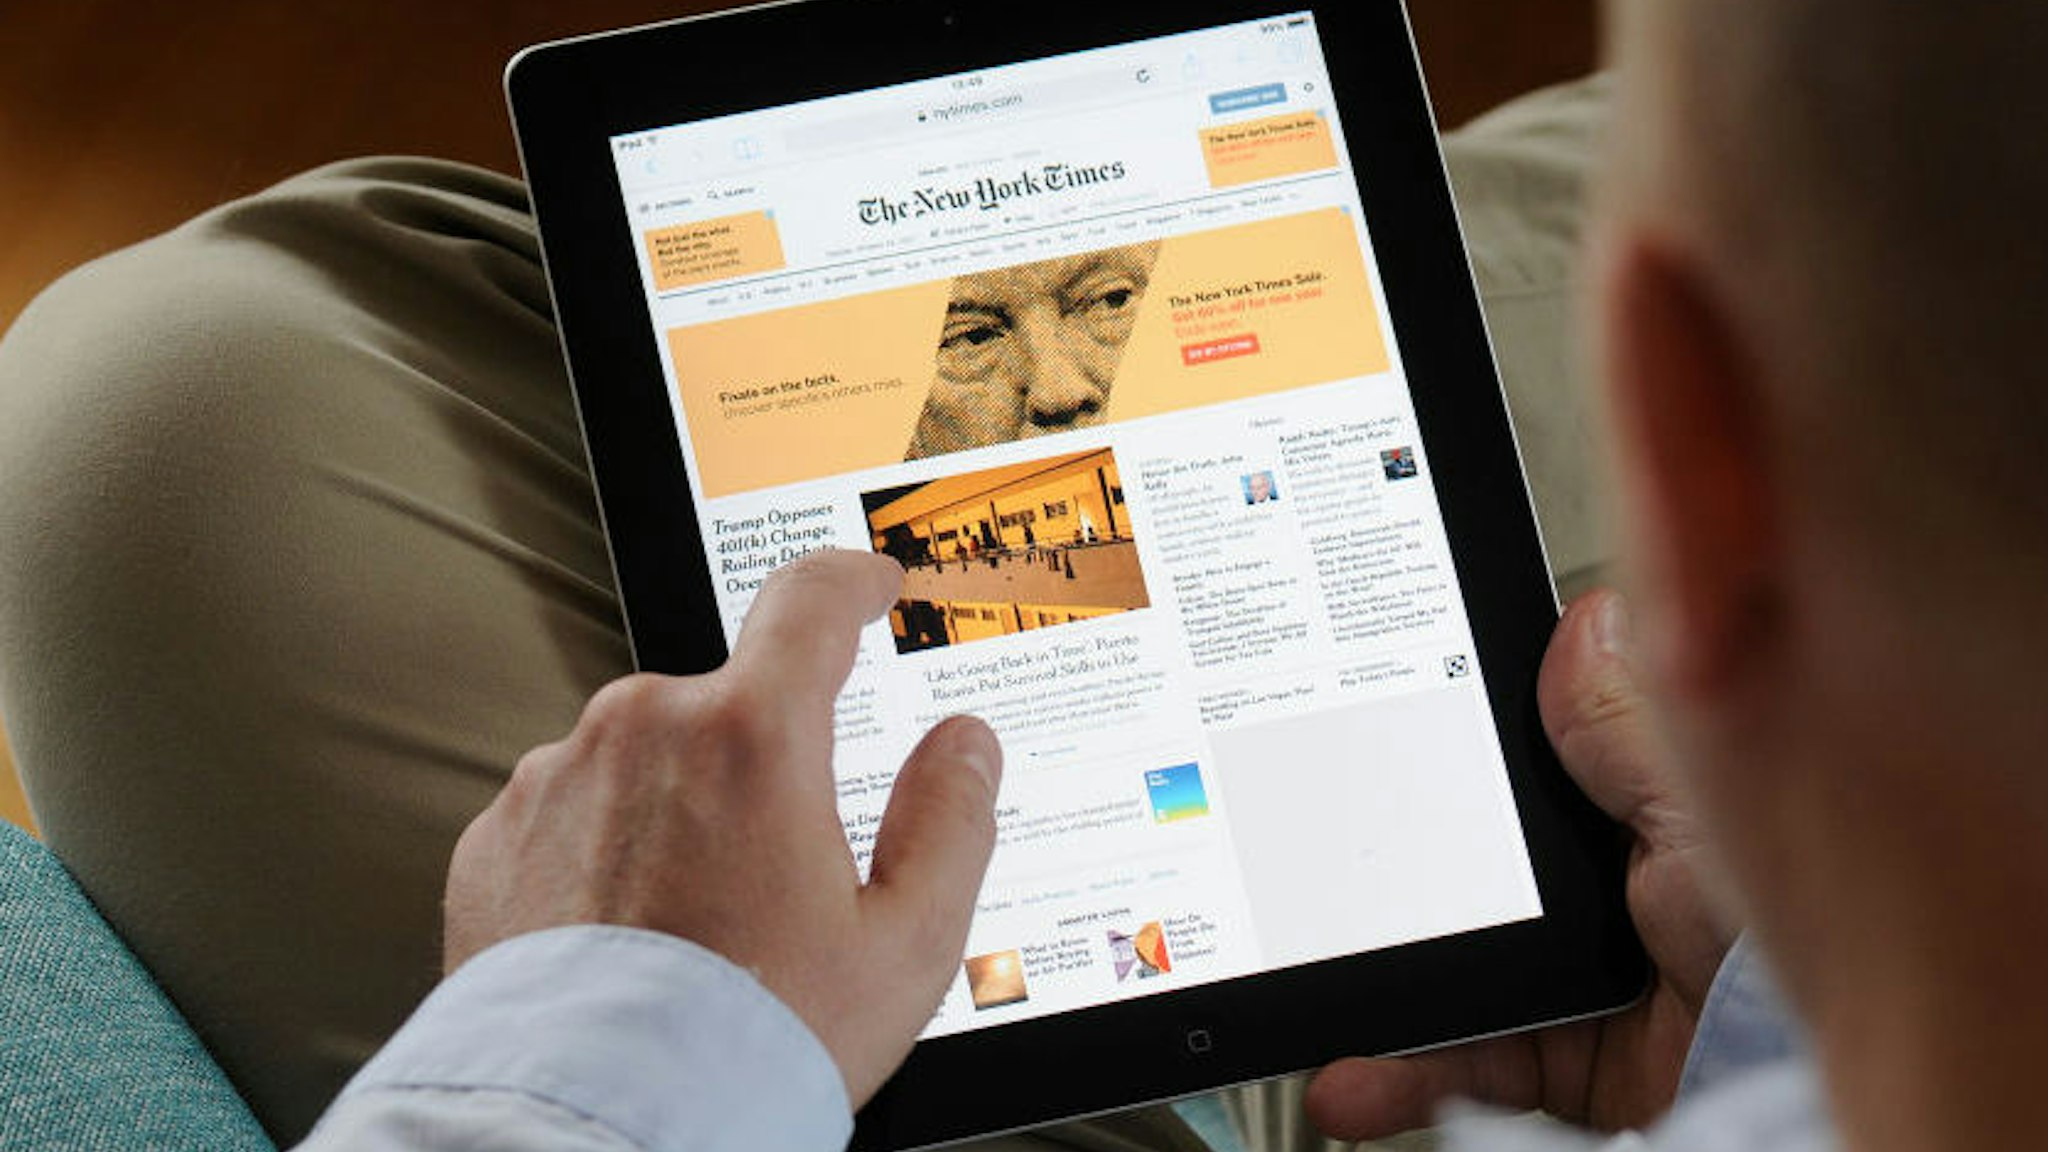 A man is seen reading the New York Times on an iPad on October 24, 2017.